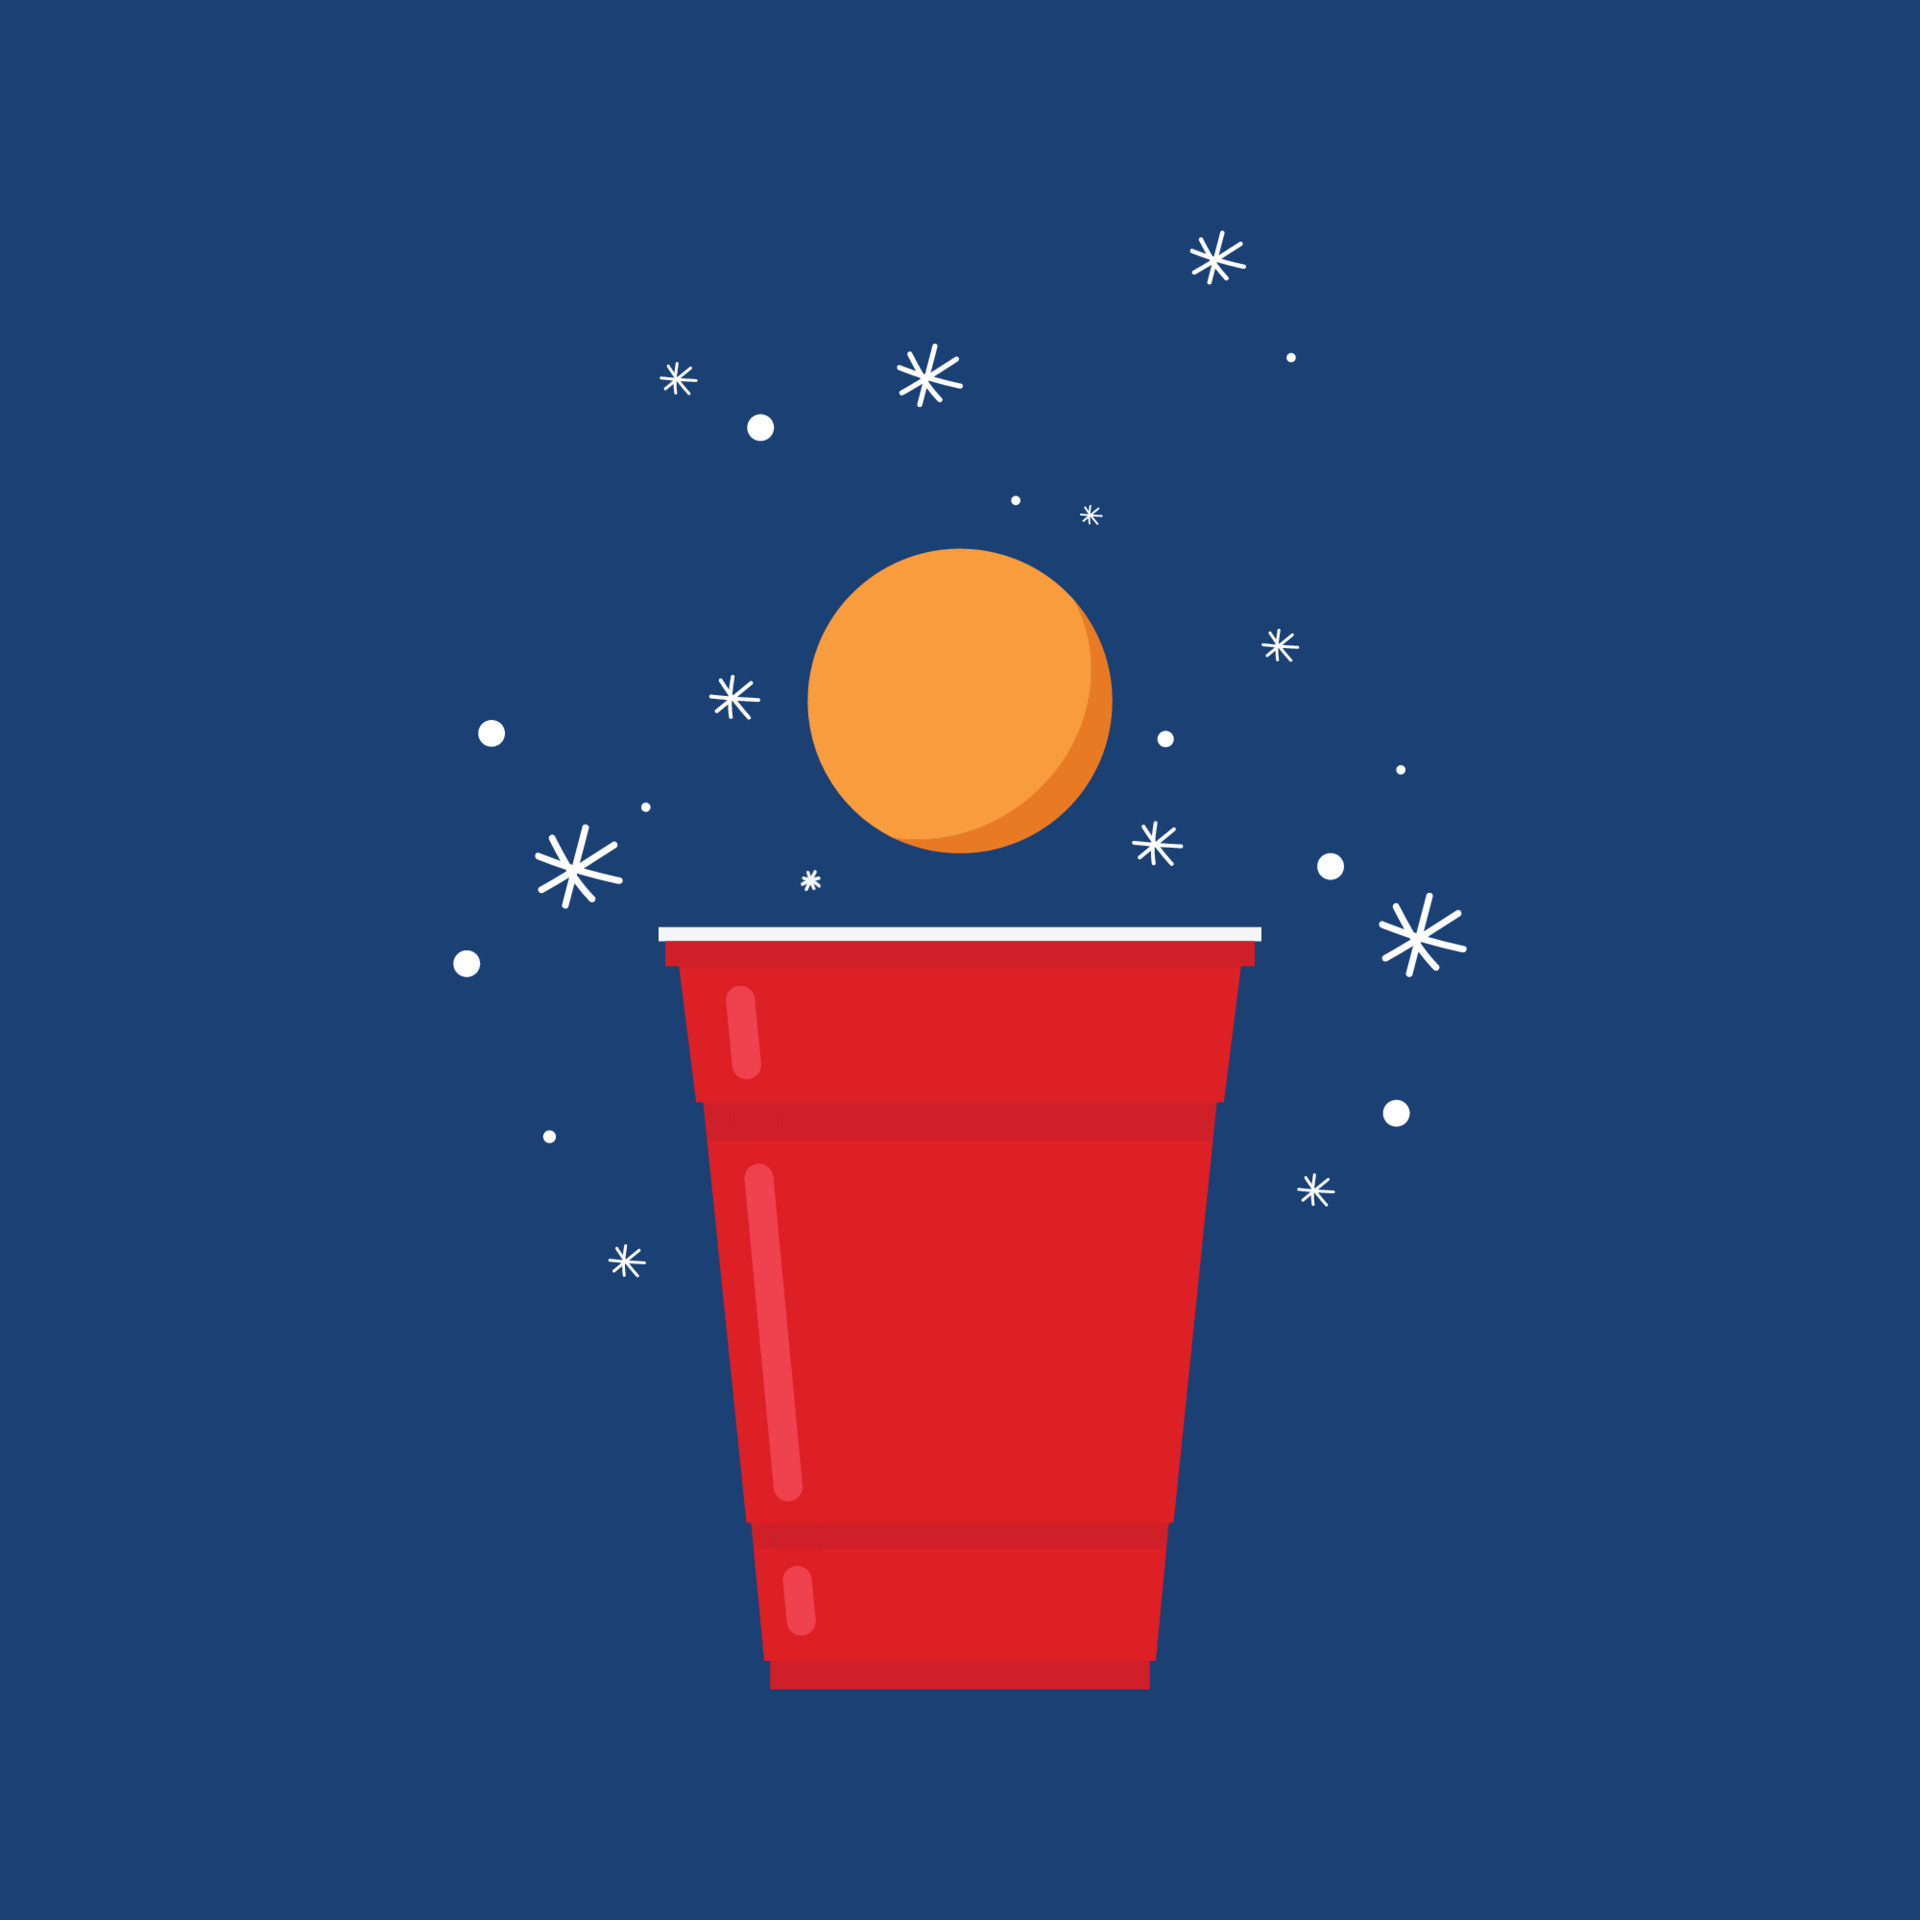 Red plastic cups and ball for game of beer pong Stock Photo by